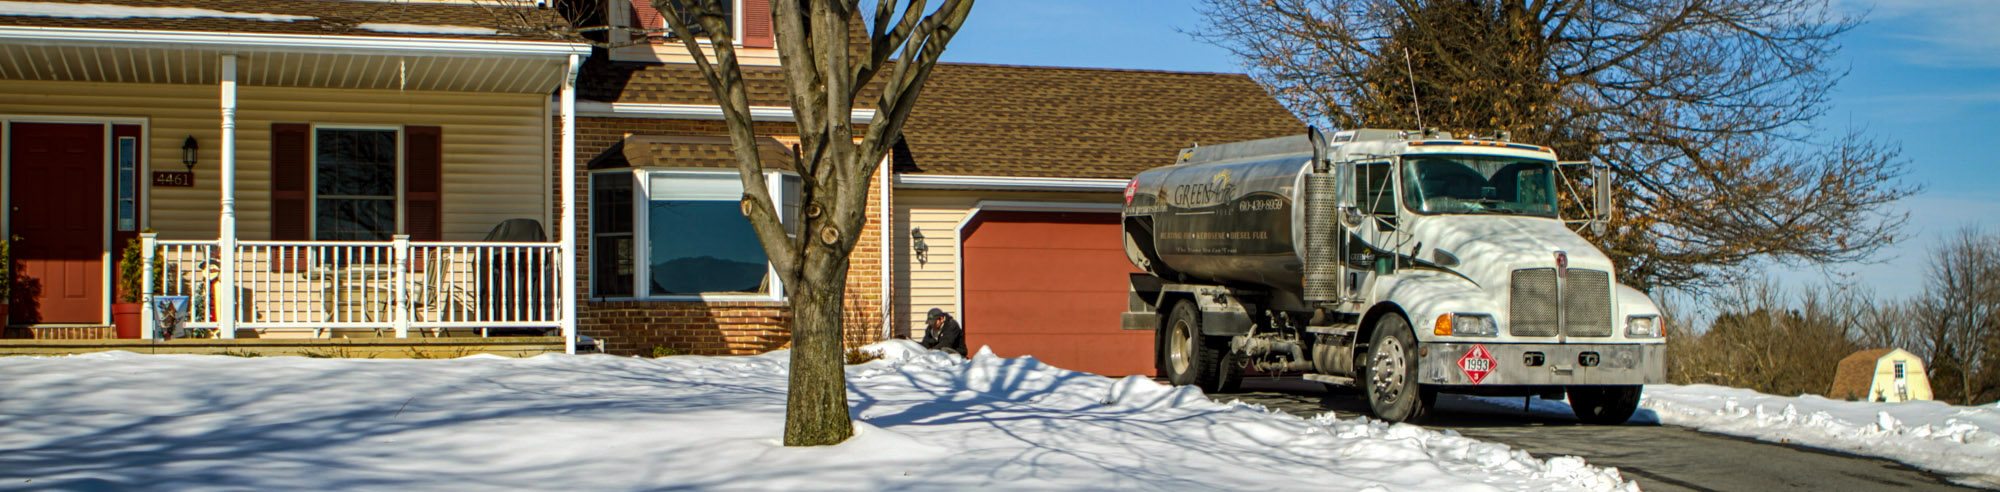 Get Current Heating Oil Price for Lehigh Valley - Green Acres Fuel